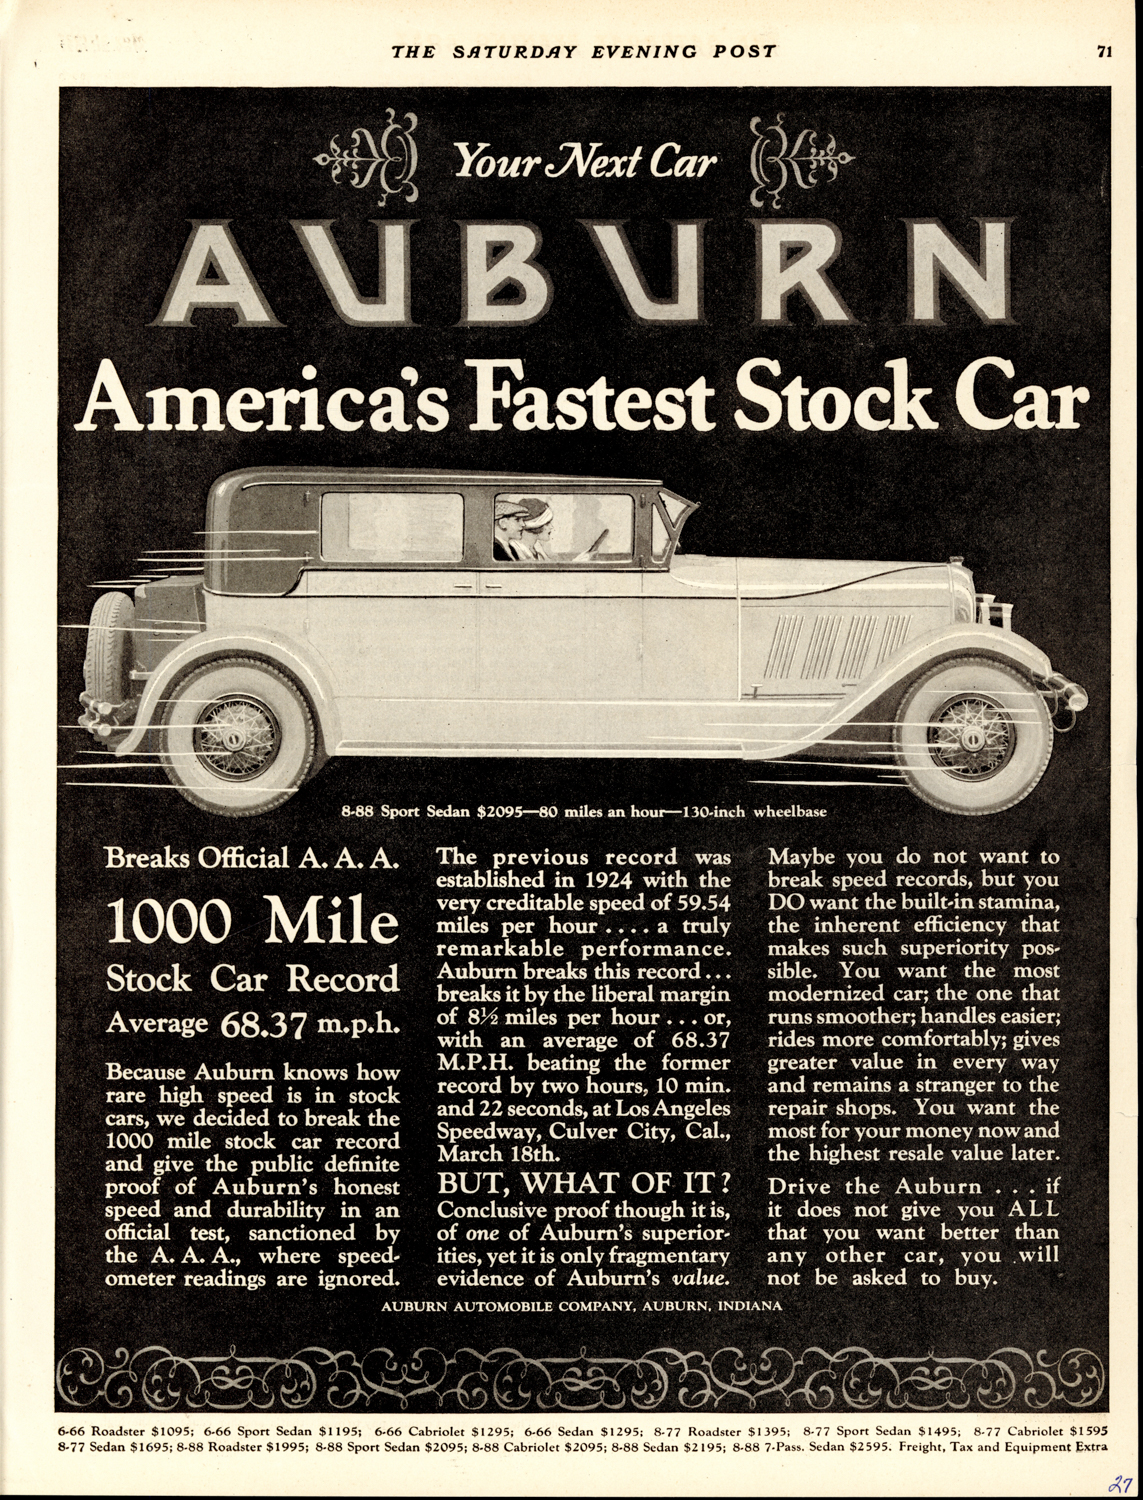 Coachwork by McFarland set the Auburn apart from its competitors. 